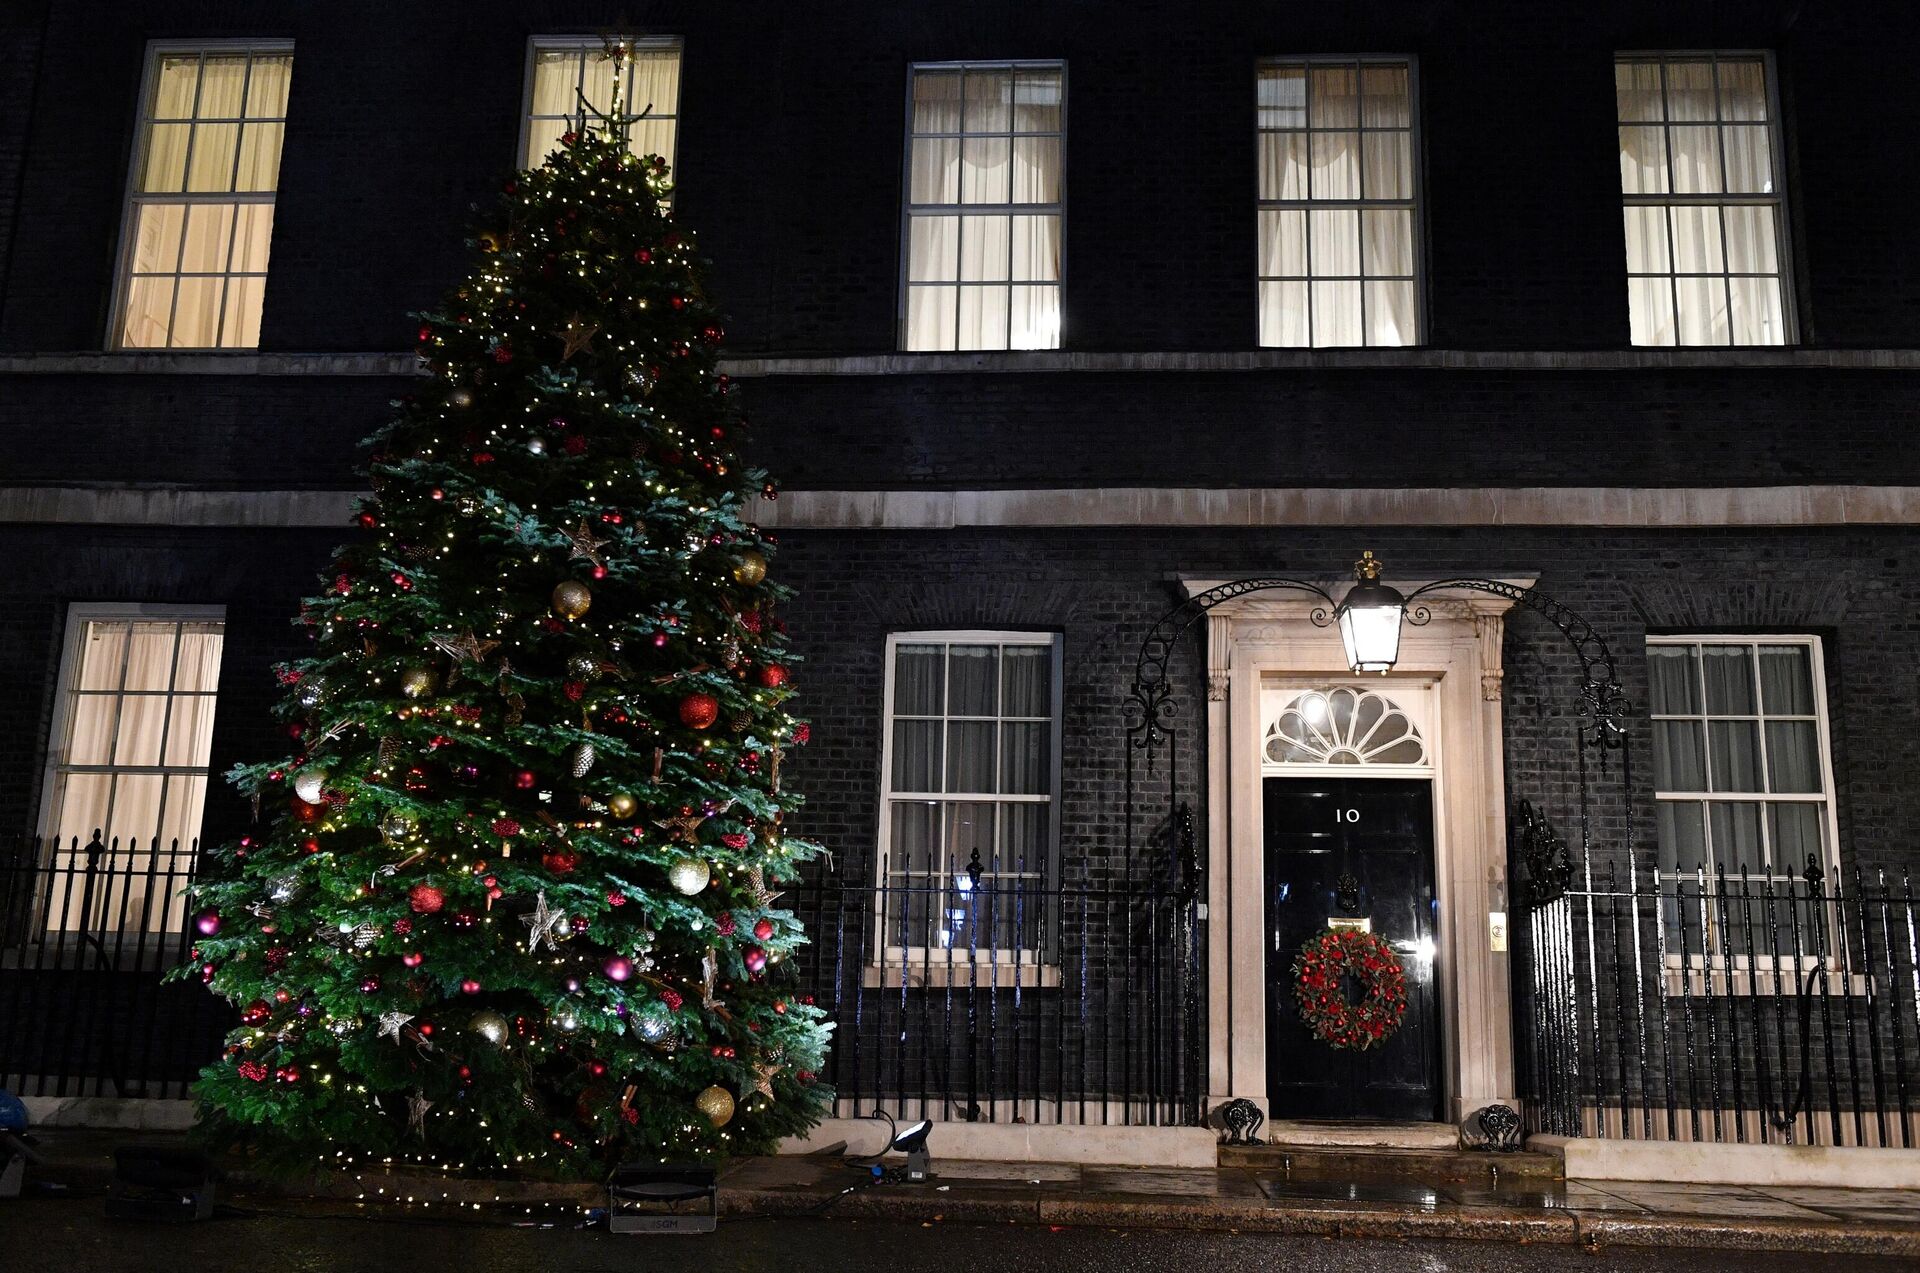 The annual Downing Street Christmas tree is pictured outside 10 Downing Street, in central London on December 1, 2021. (Photo by JUSTIN TALLIS / AFP) - Sputnik International, 1920, 10.12.2021